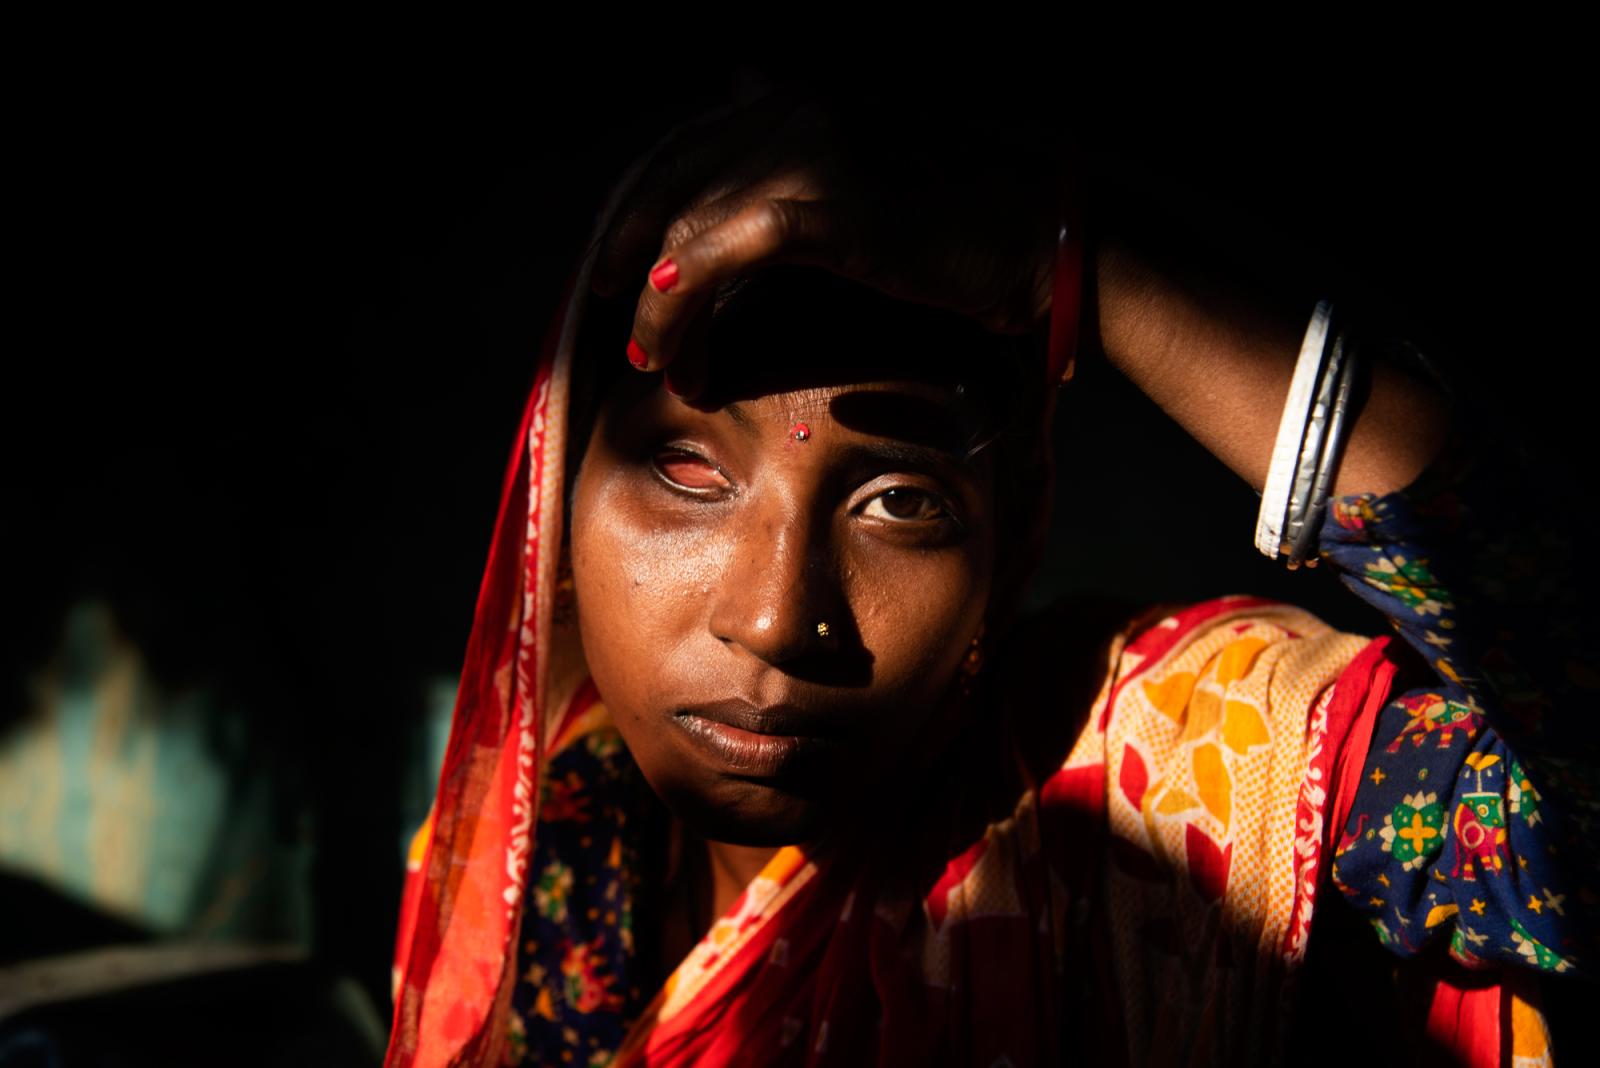 Image from Portraits - Saraswati Roy, 22 years old lady, wife of 32 years old...